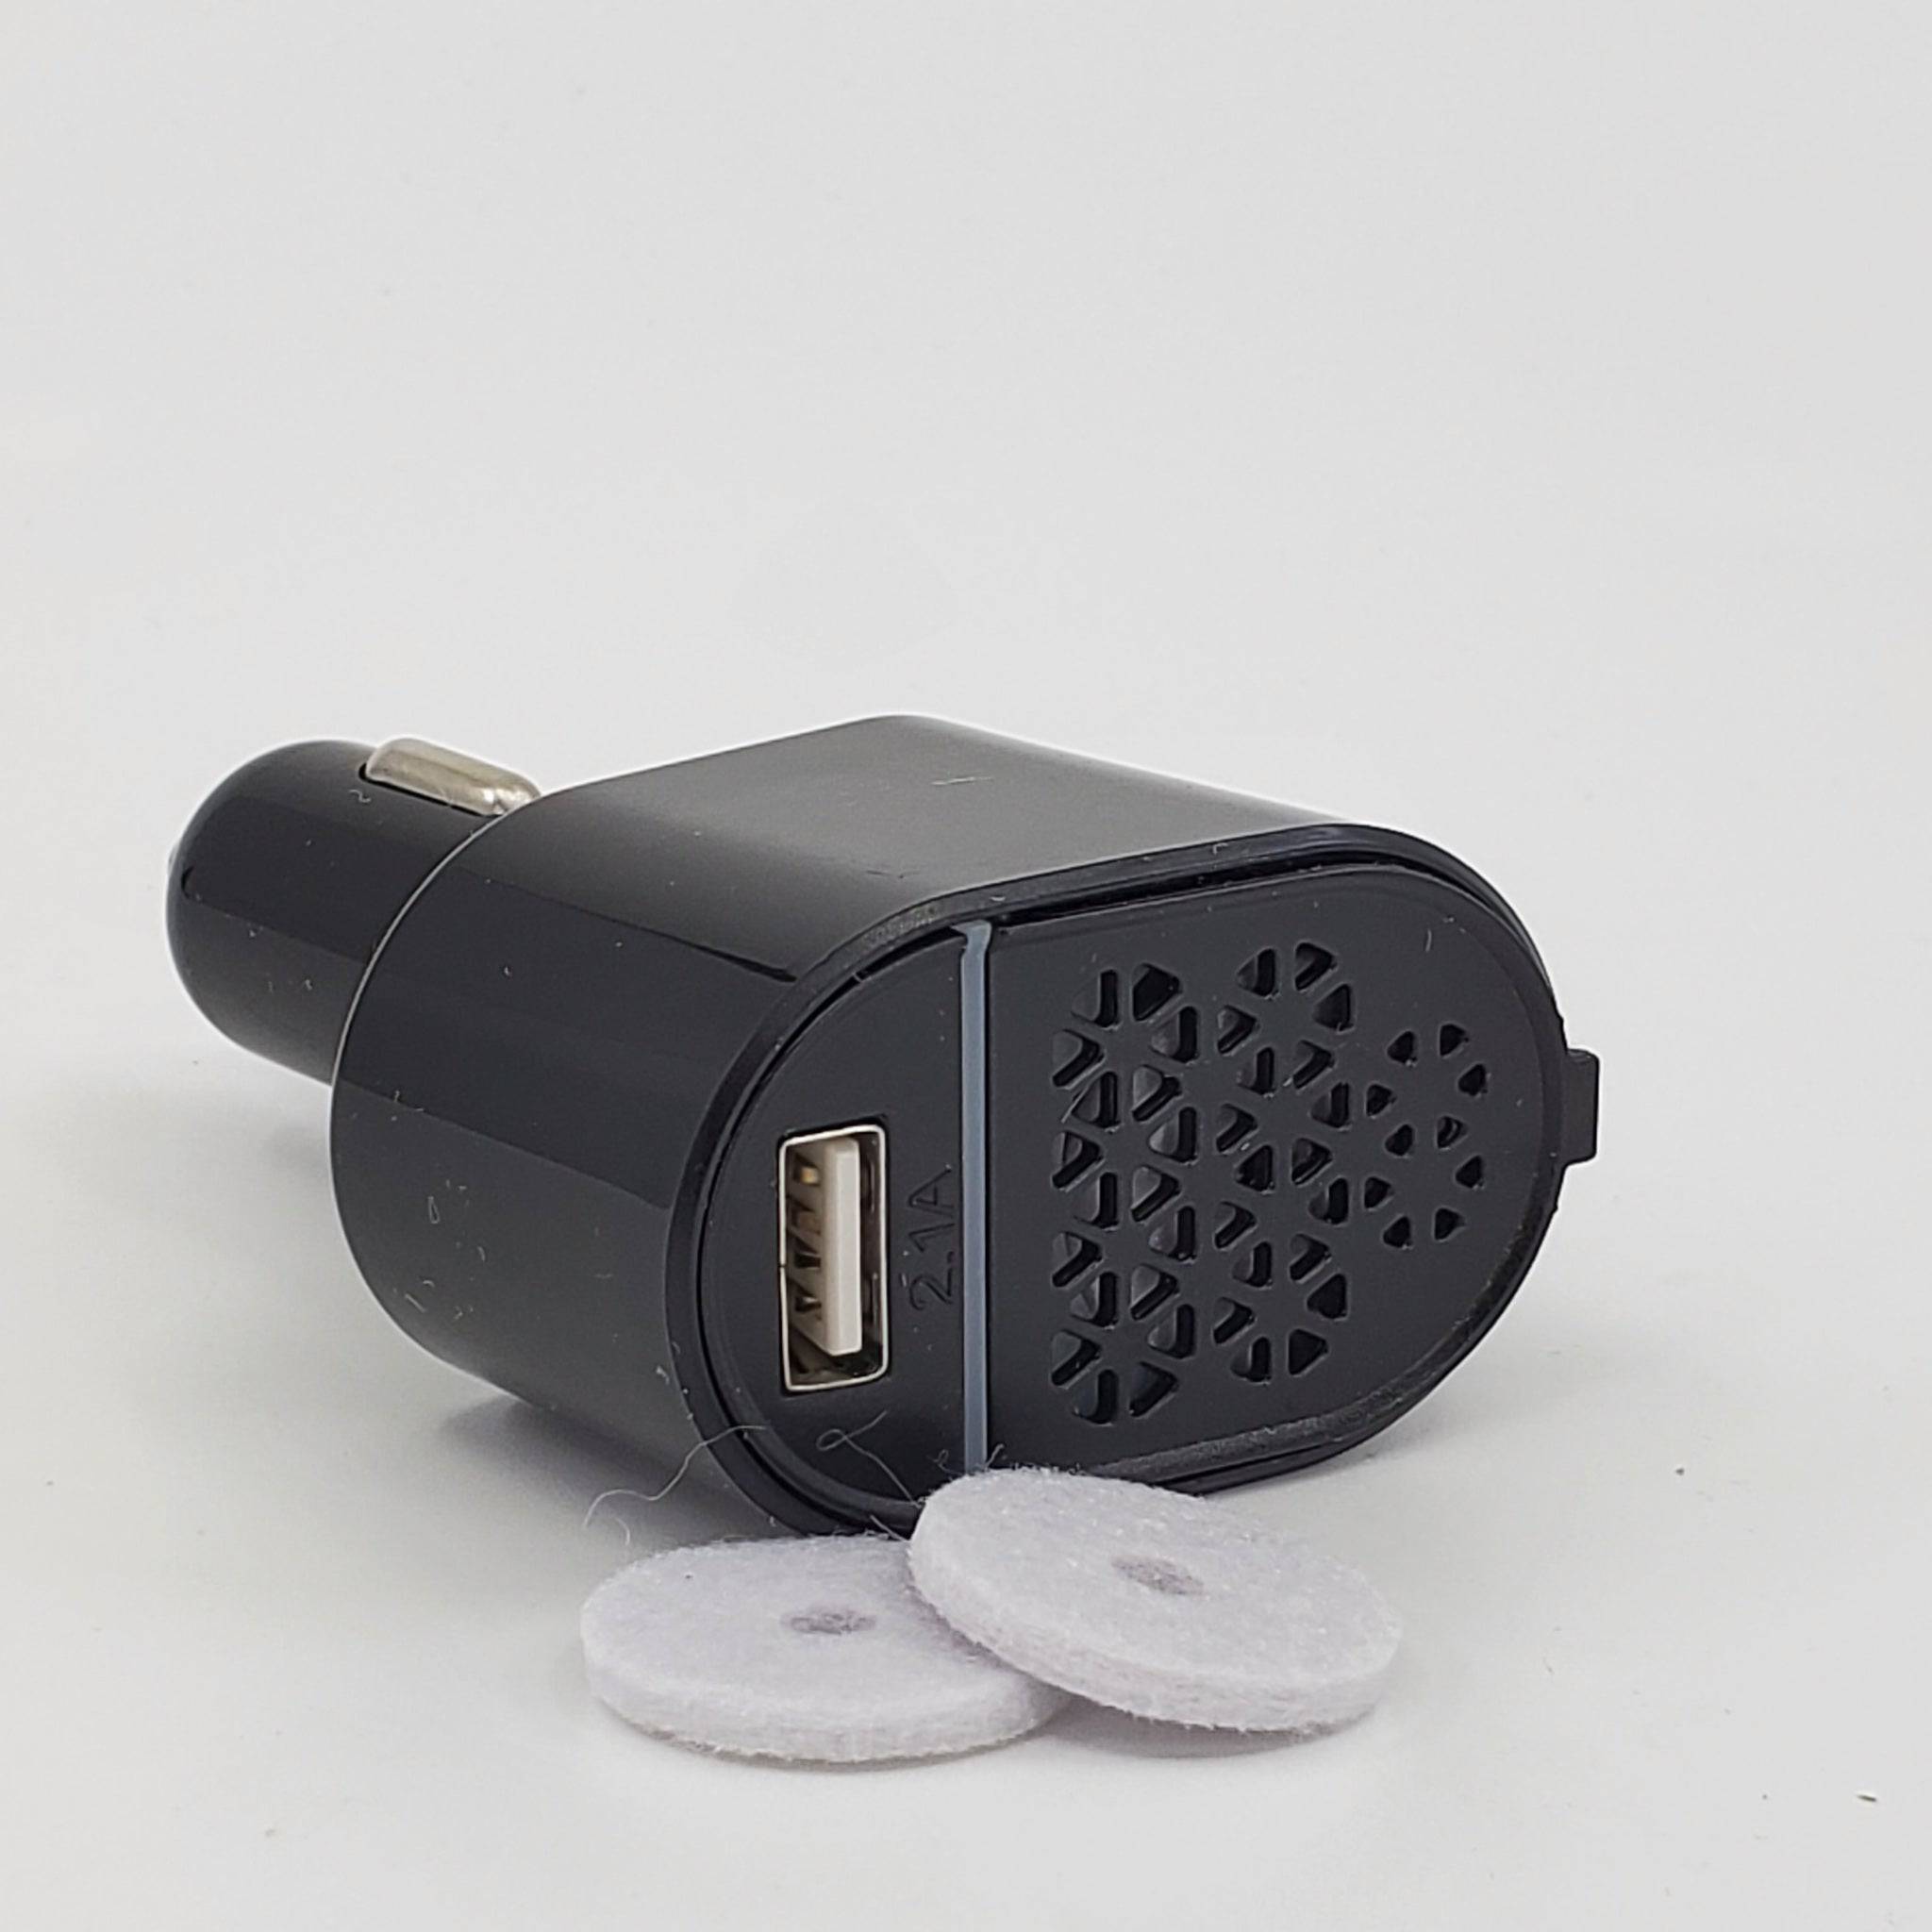 Car Breeze Essential Oil Diffuser - The Mockingbird Apothecary & General Store